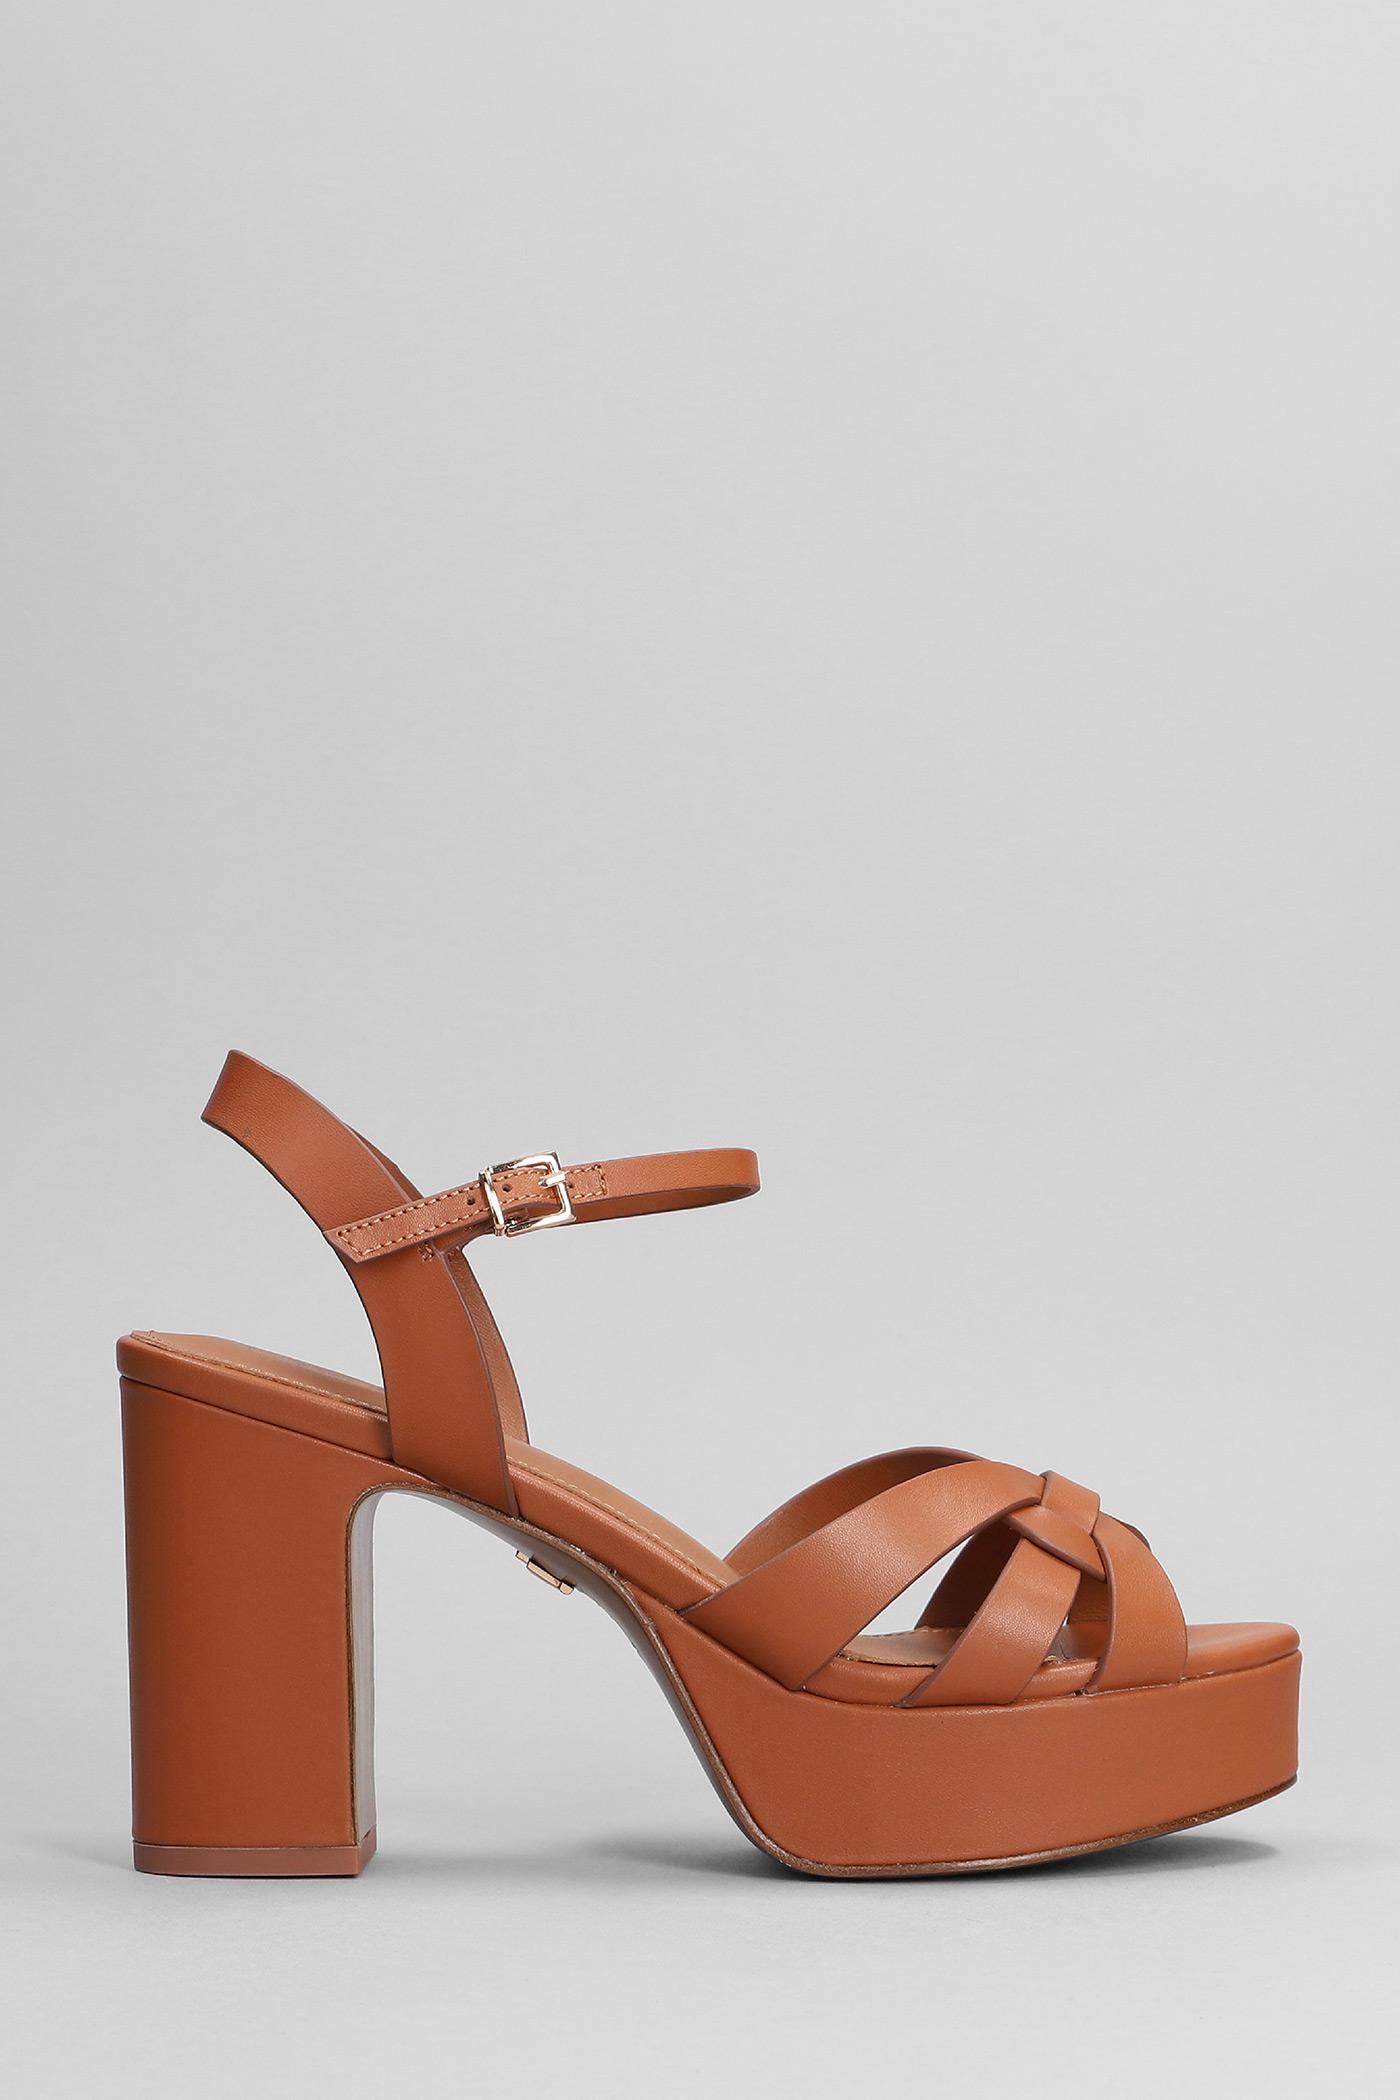 Lola Cruz Sandals In Leather Color Leather | Lyst